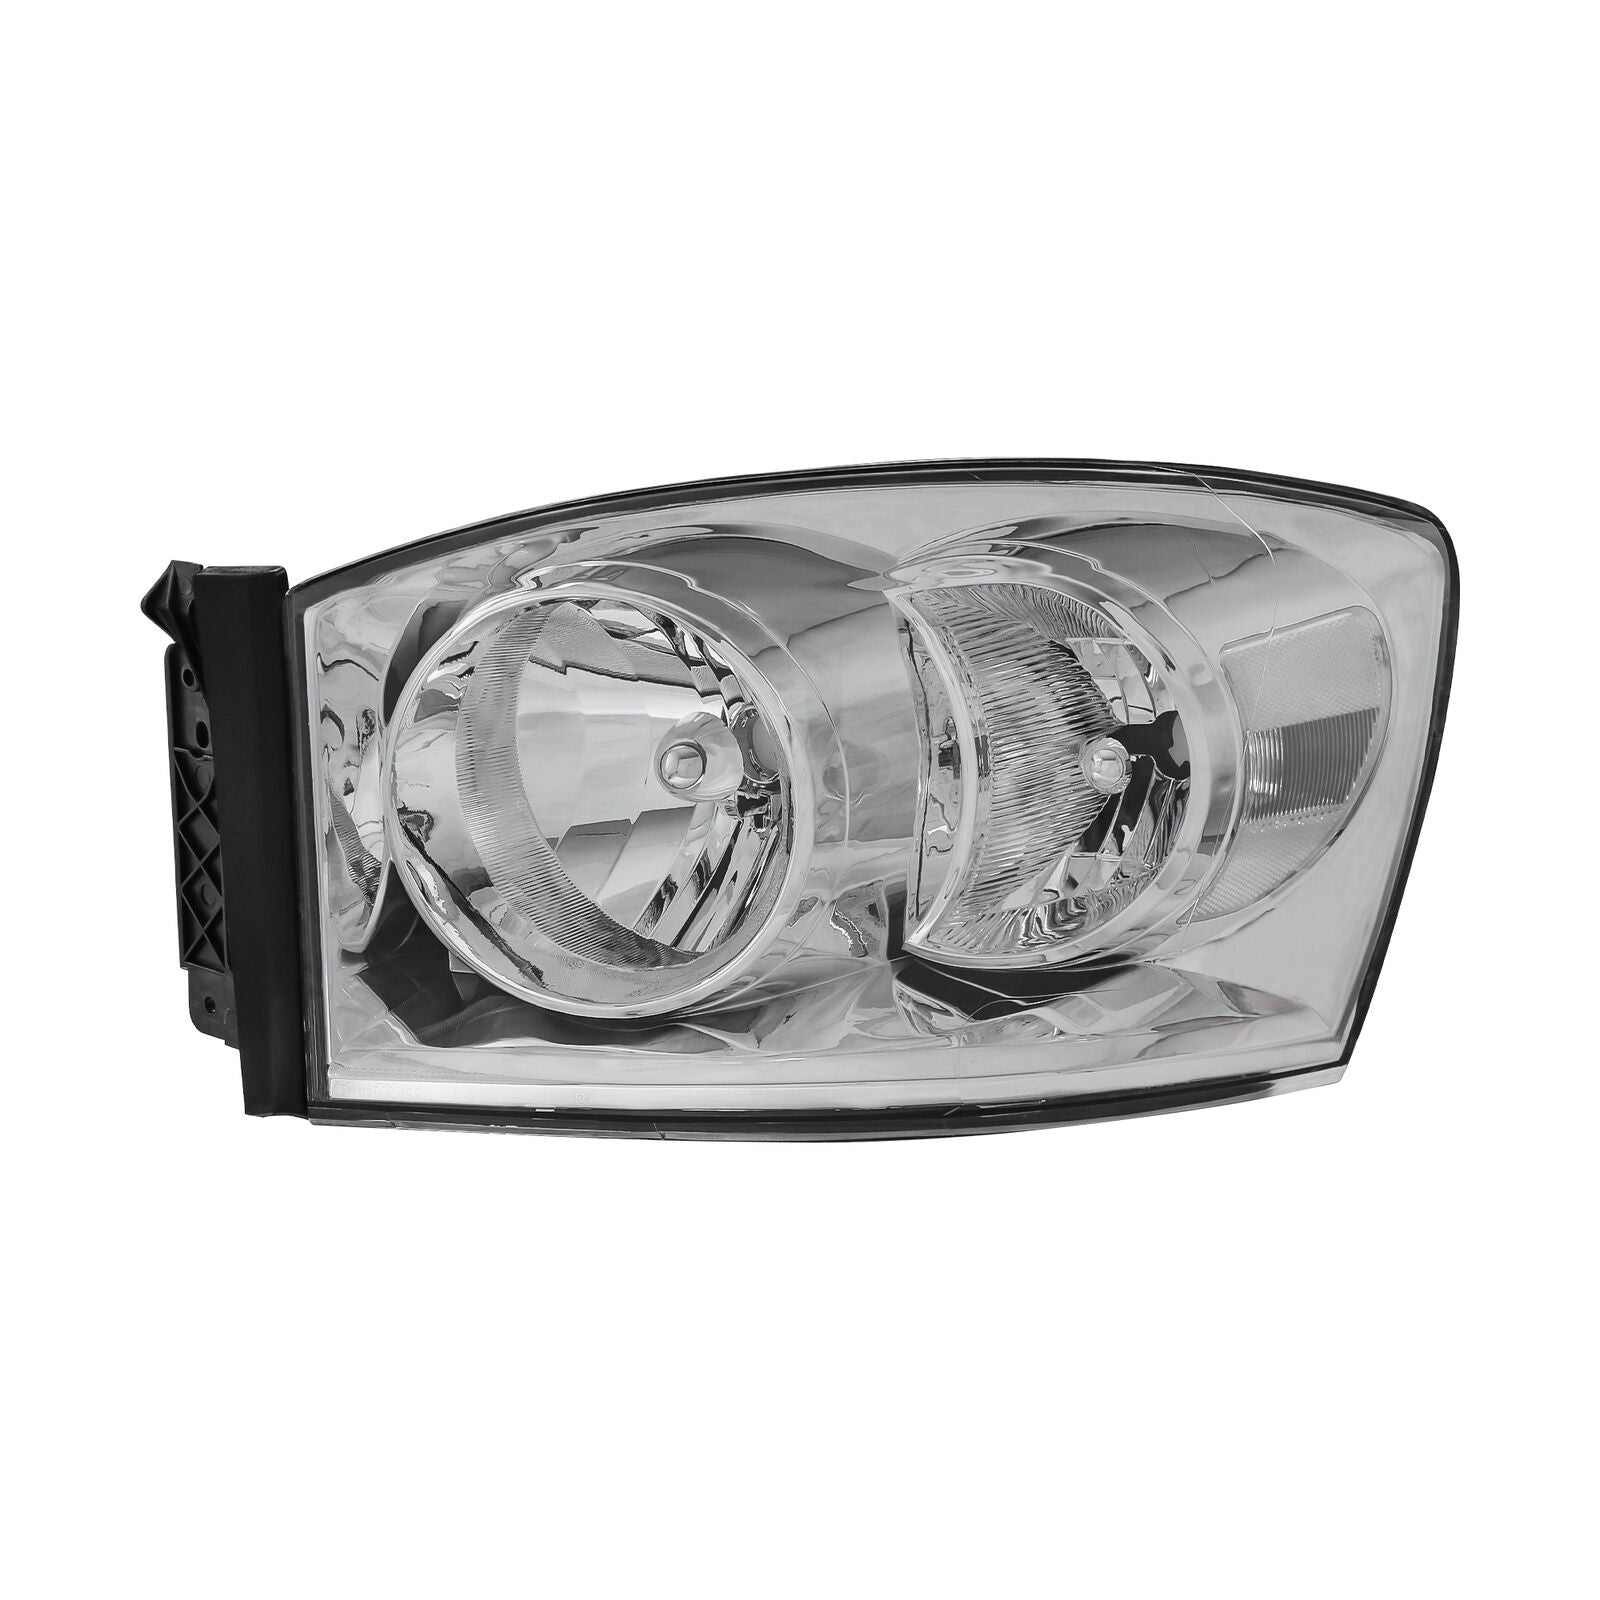 Headlight Assembly Compatible with 2006-2008 Dodge Ram 1500, 2006-2009 Dodge Ram 2500/3500 Replacement Headlamp with Chrome Housing/Clear Lens/Clear Reflector